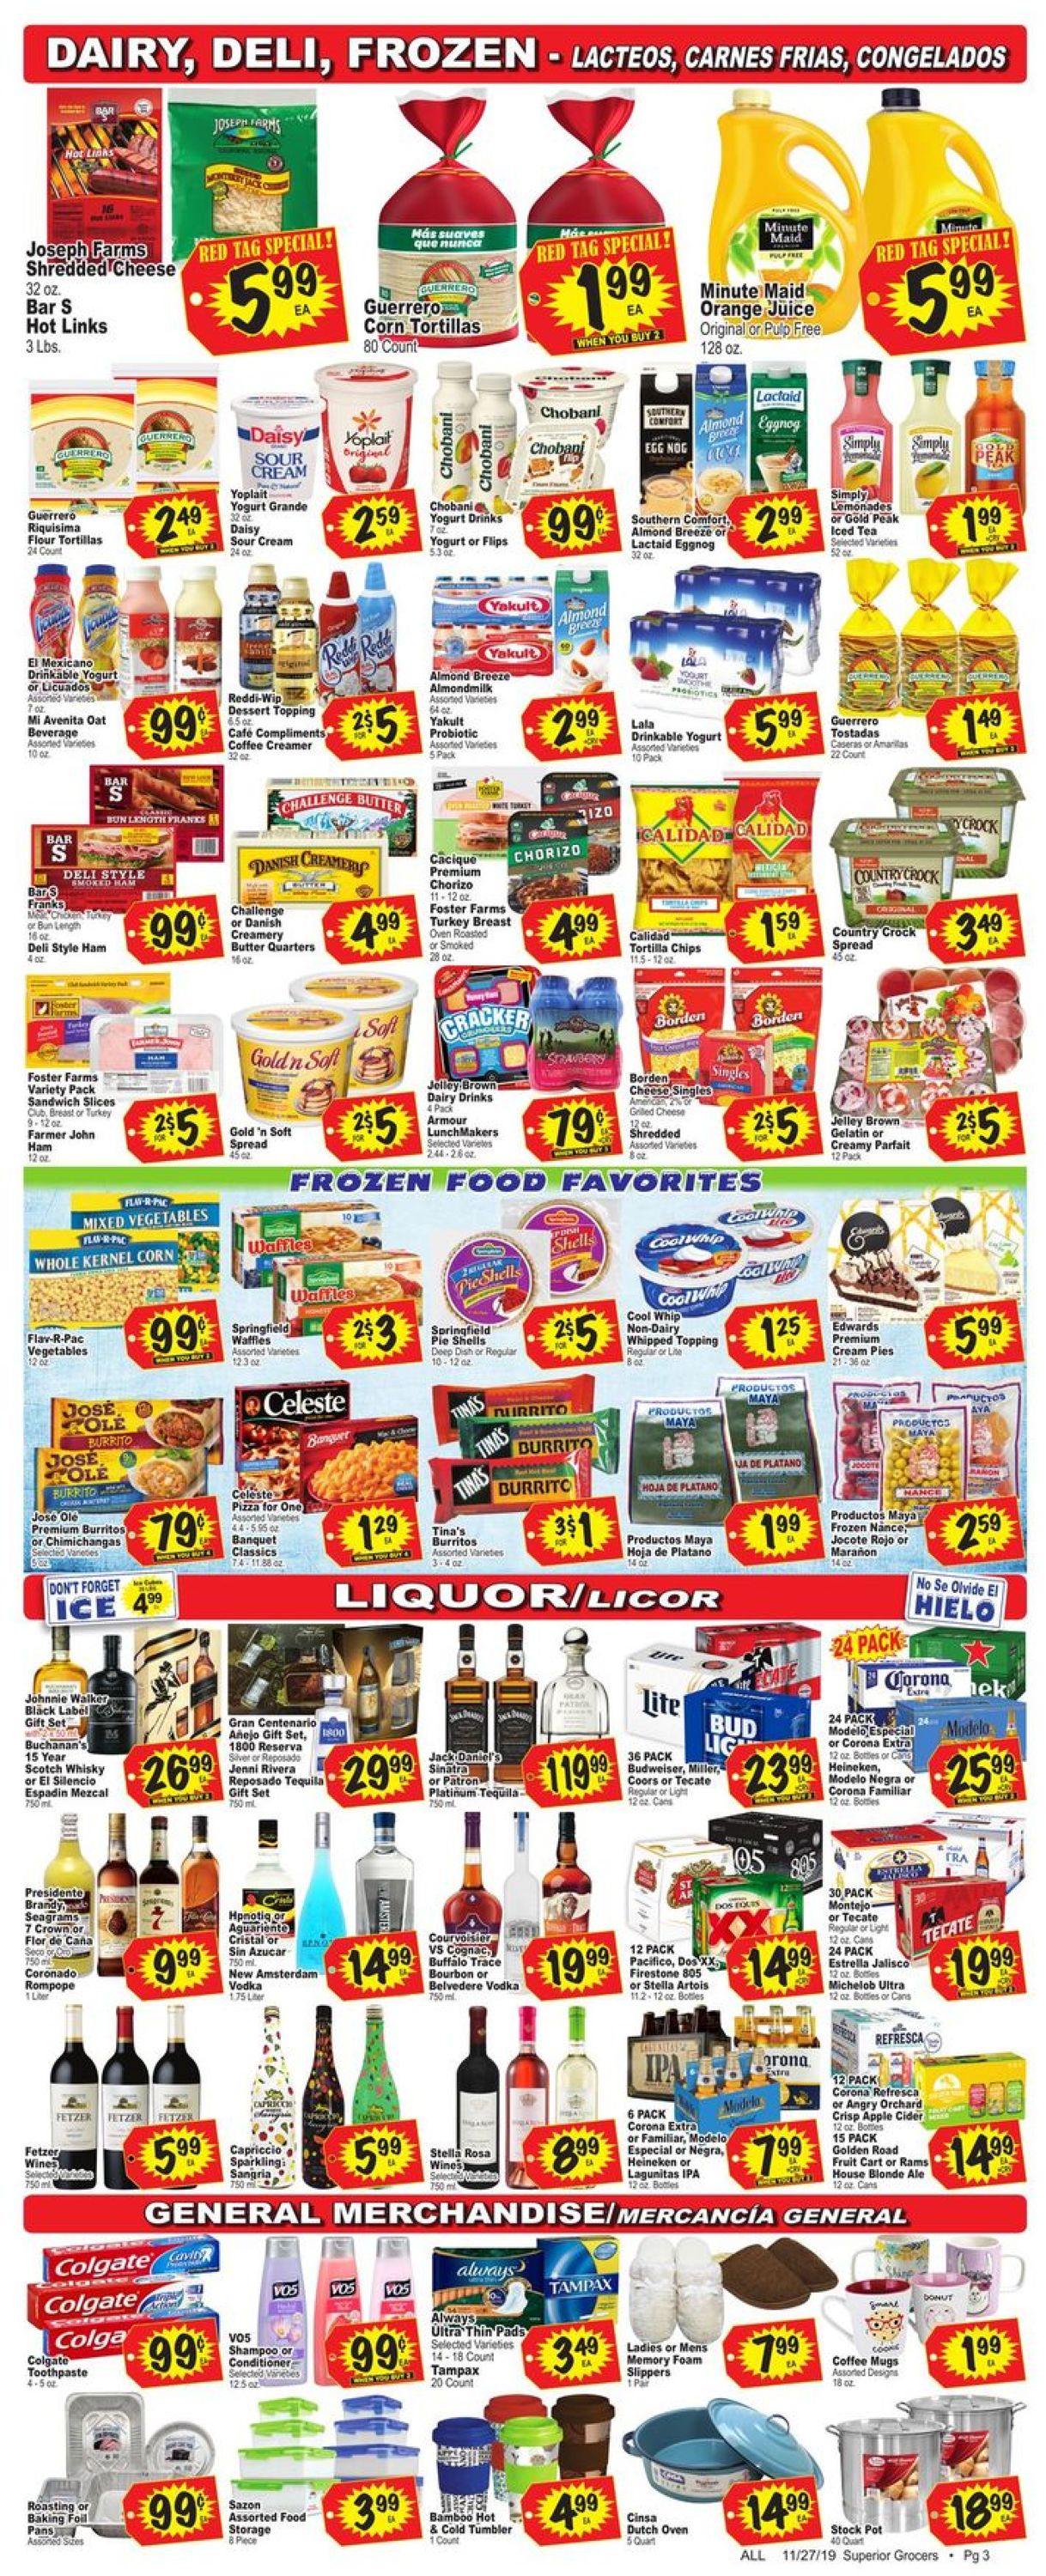 Catalogue Superior Grocers from 11/27/2019